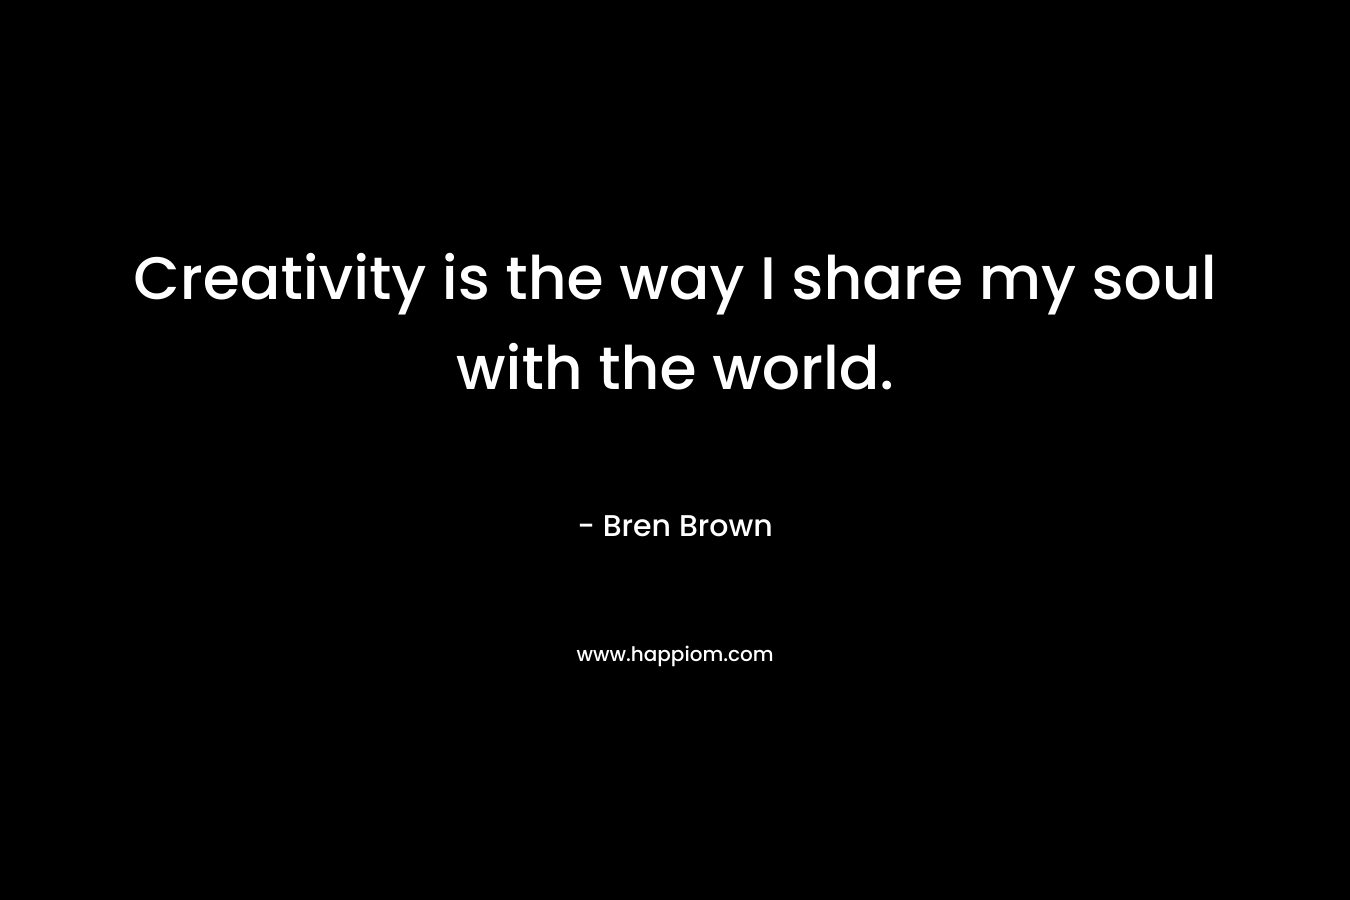 Creativity is the way I share my soul with the world.